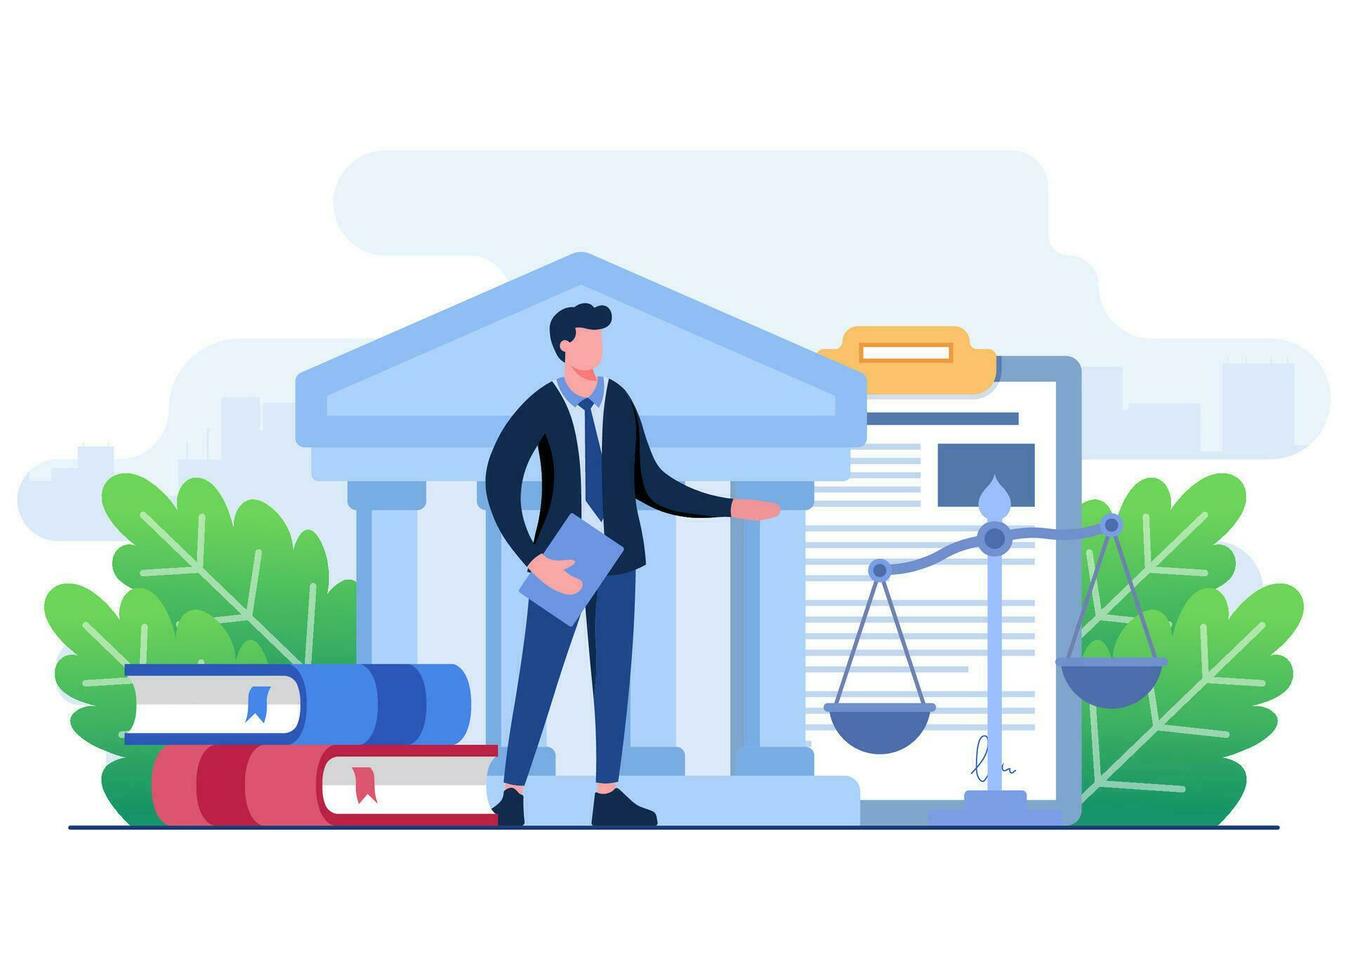 law and justice flat illustration,  Law firm and legal services, Public law consulting, Lawyer, Legal assistance concept for ui, web design, landing page, web banner, mobile app vector